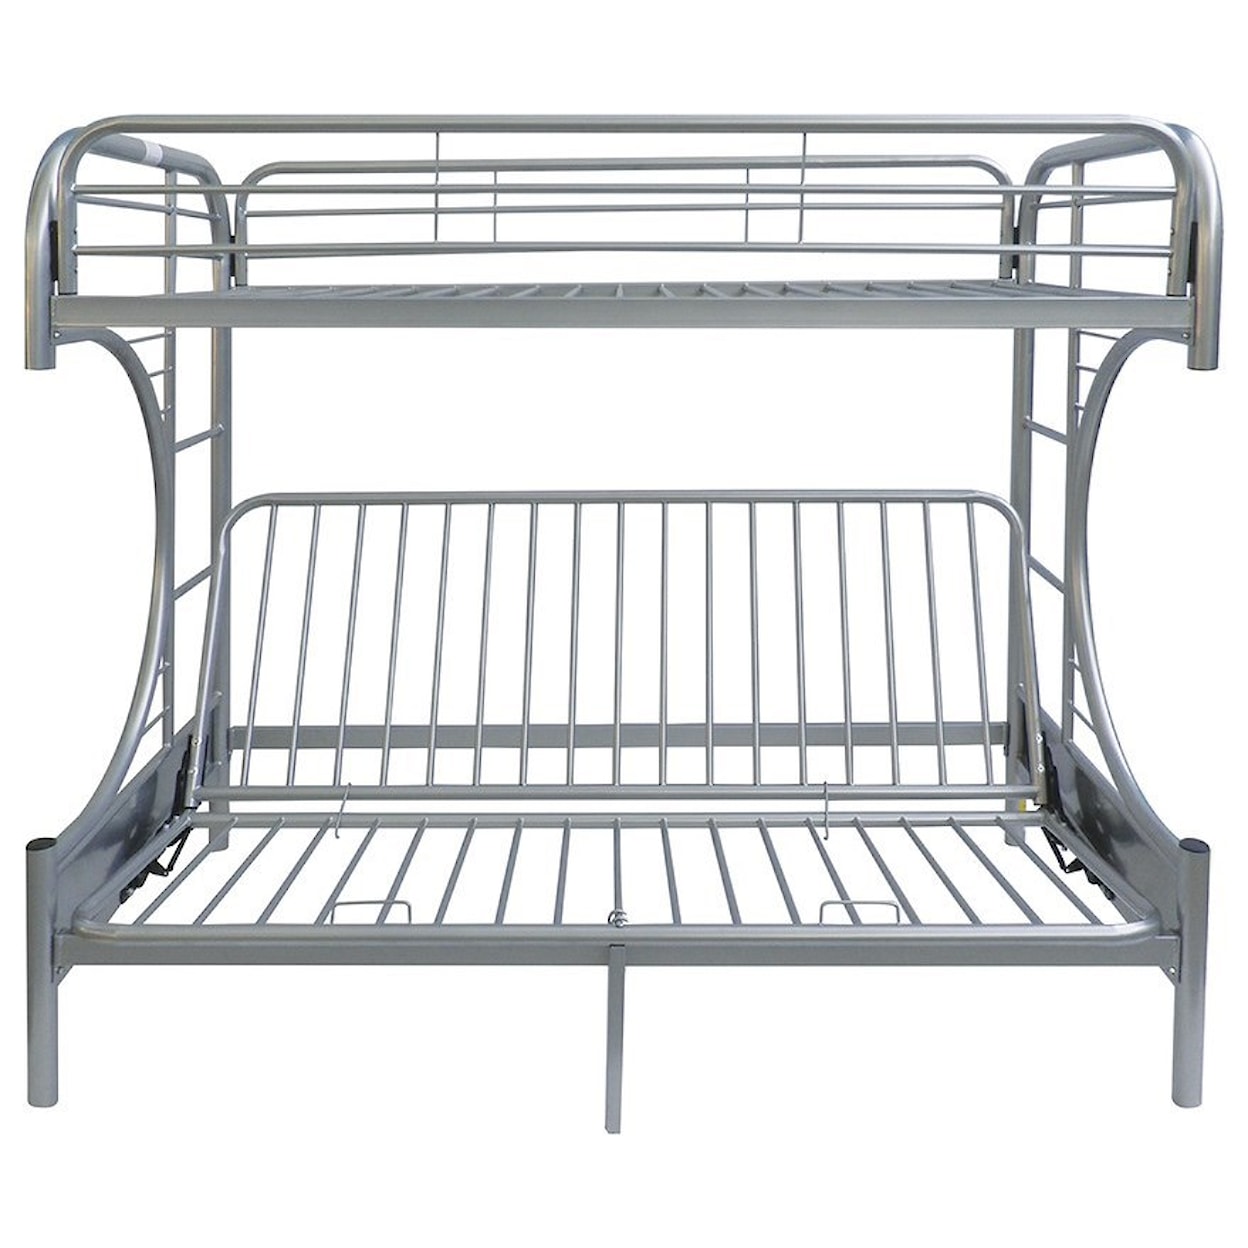 Acme Furniture Bunk Bed SILVER TWIN FUTON BUNK BED |